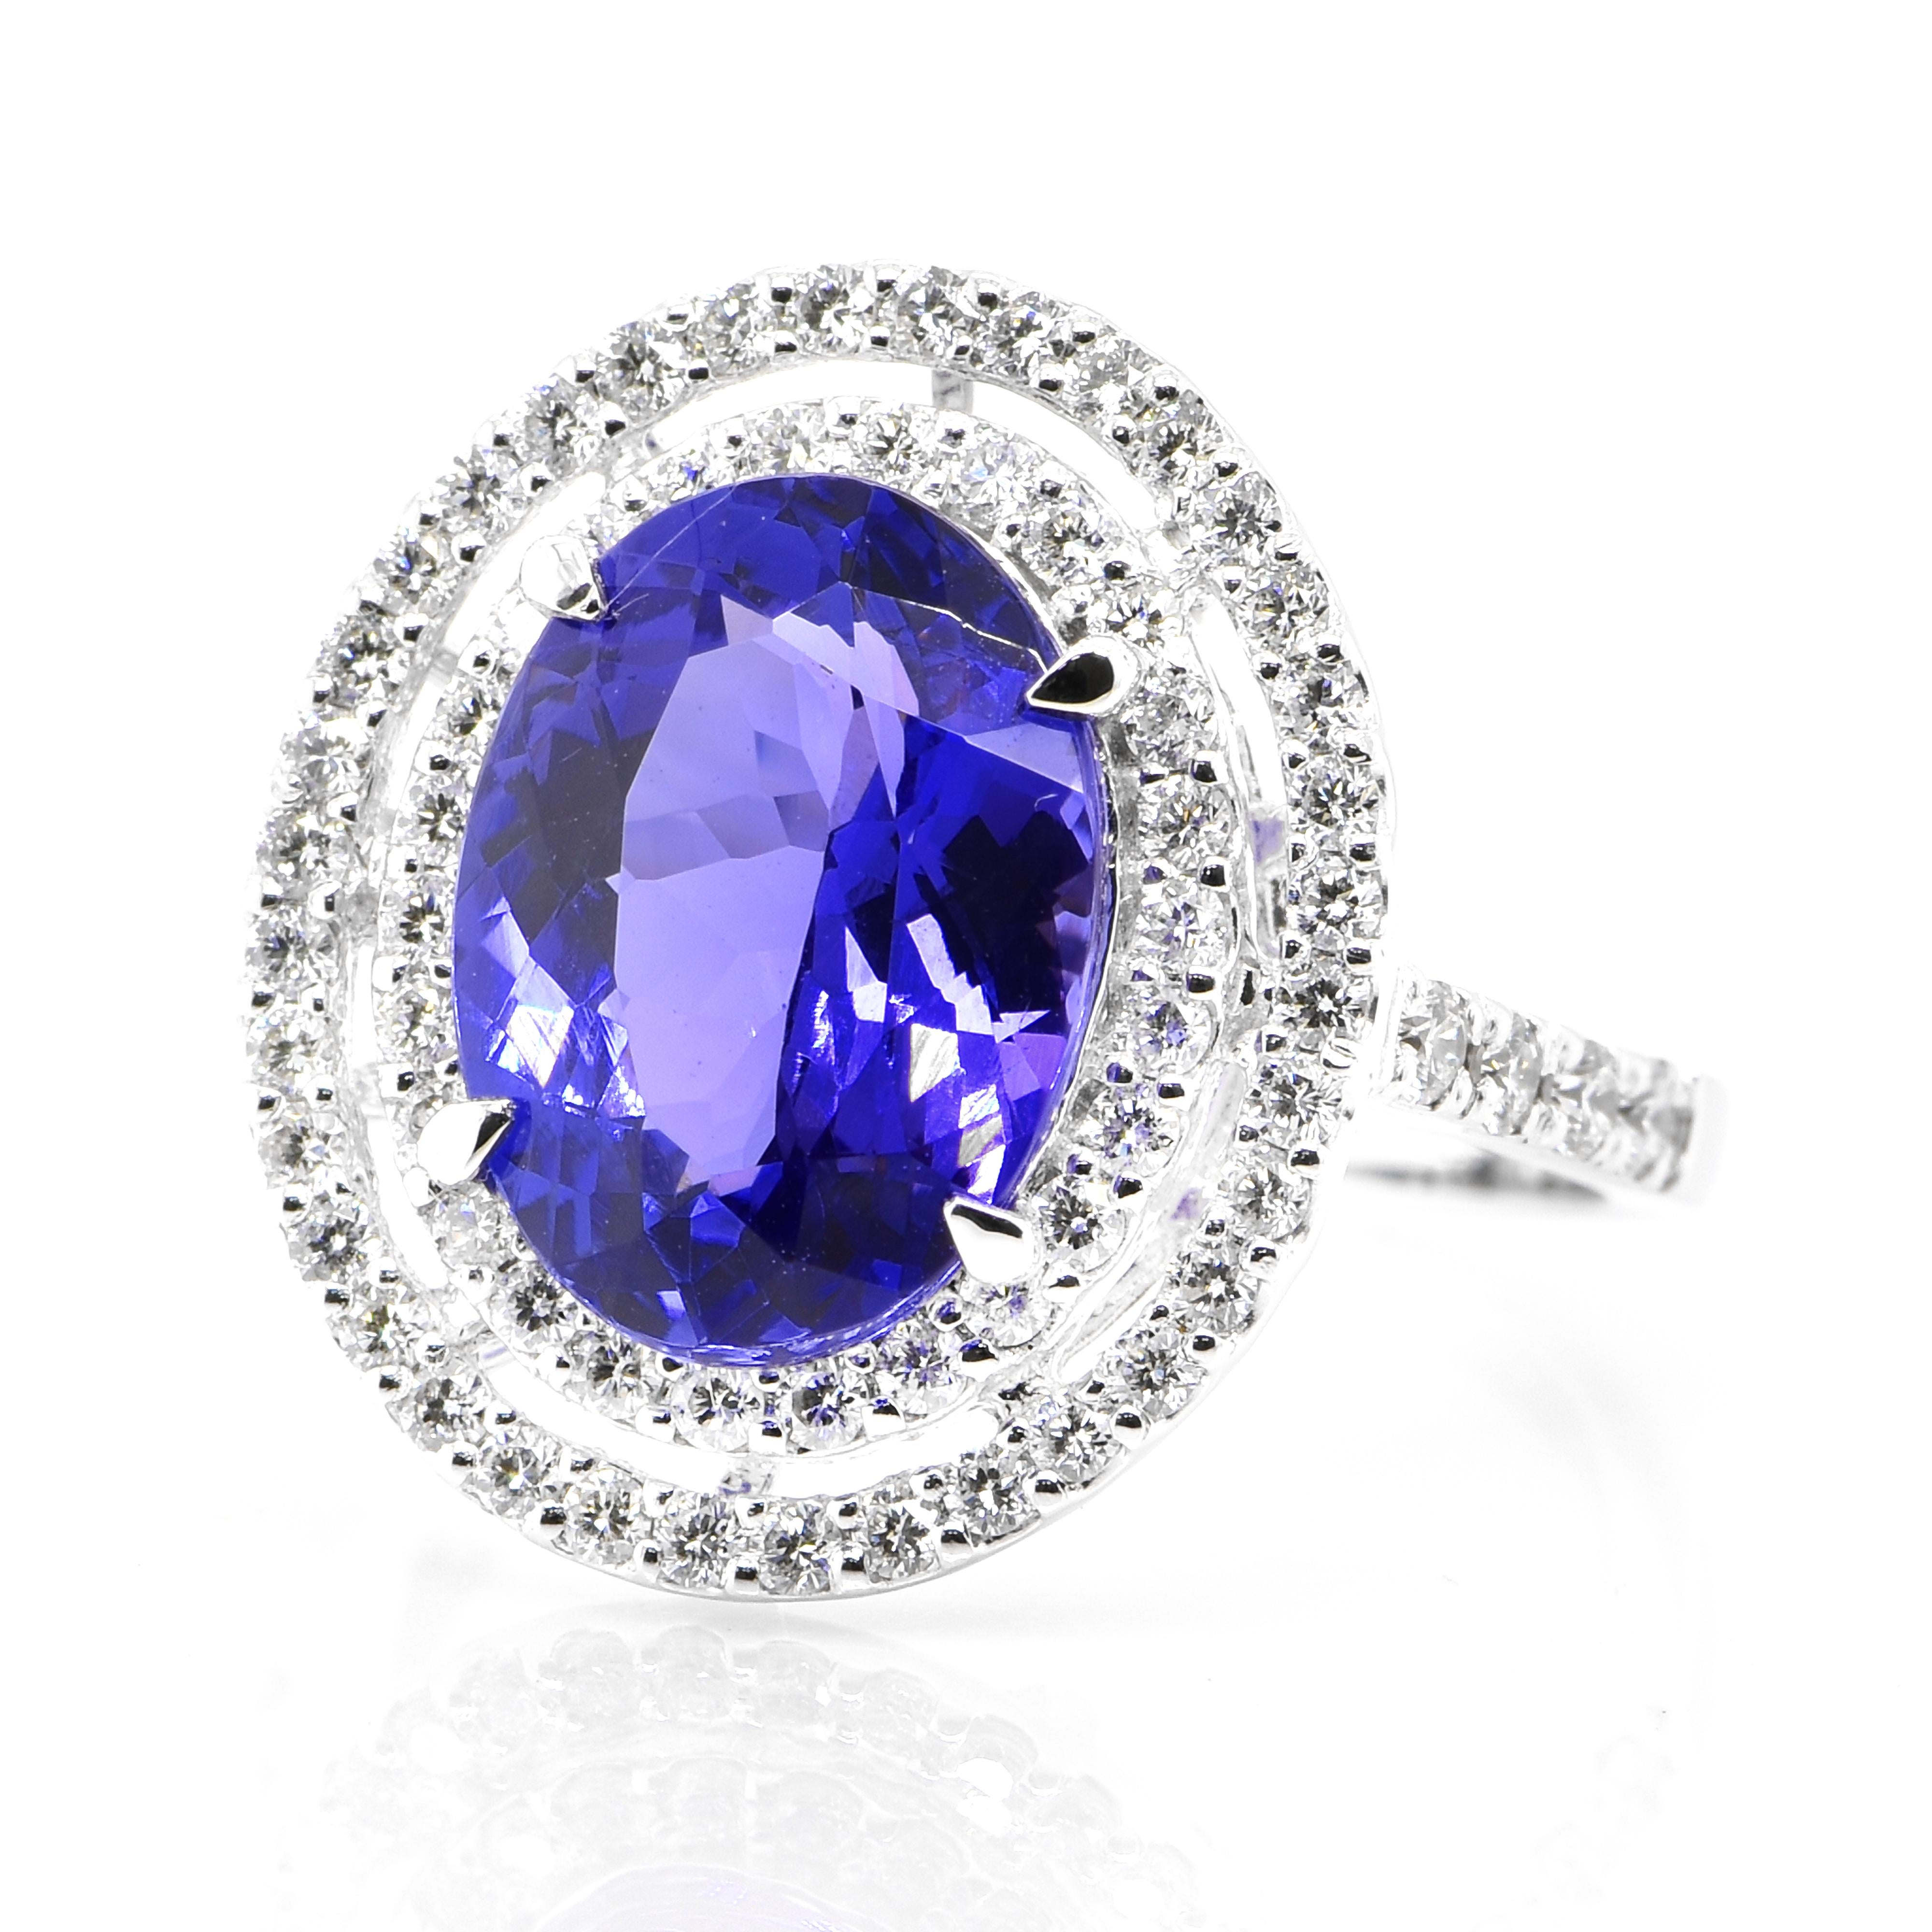 A beautiful ring featuring a 4.45 Carat Natural Tanzanite and 0.72 Carats Diamond Accents set in Platinum. Tanzanite's name was given by Tiffany and Co after its only known source: Tanzania. Tanzanite displays beautiful pleochroic colors meaning